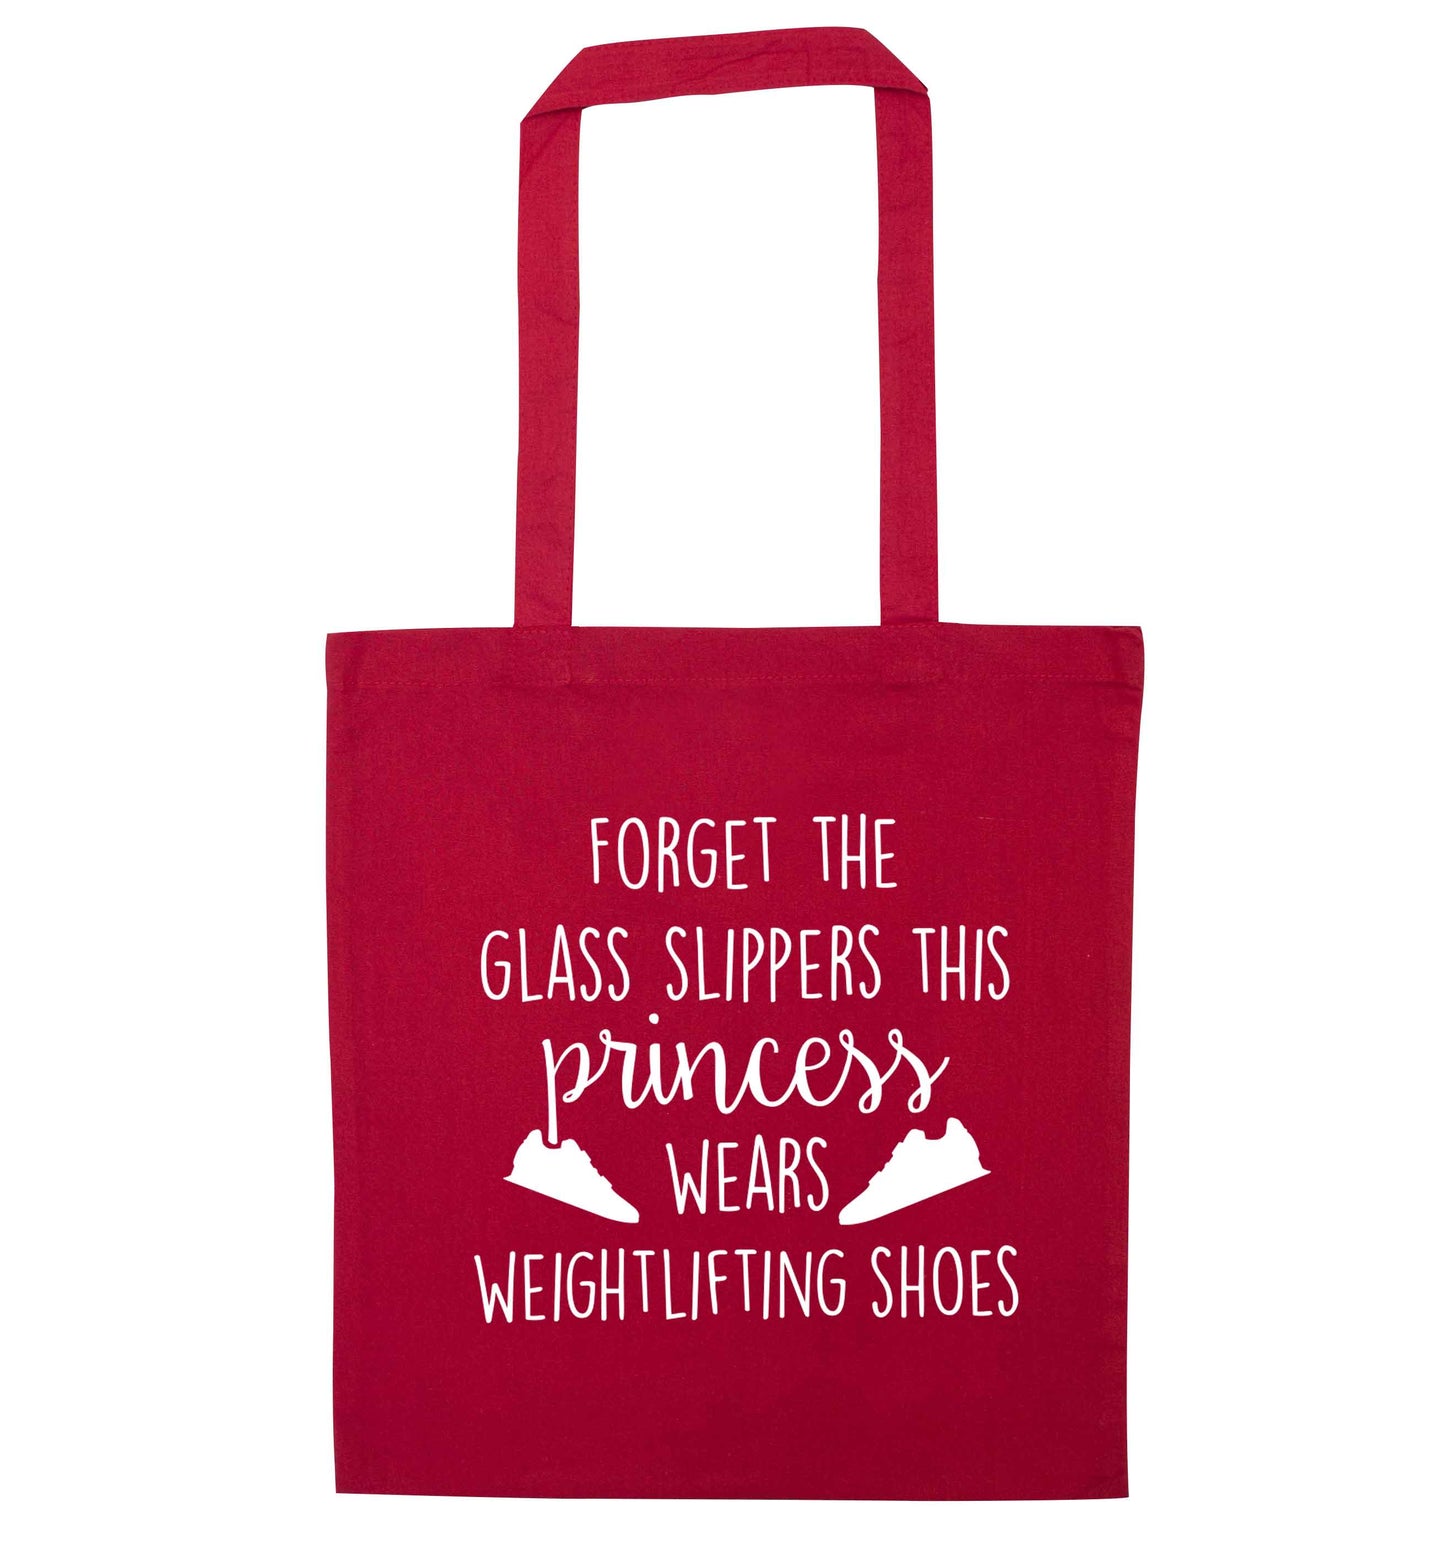 Forget the glass slippers this princess wears weightlifting shoes red tote bag